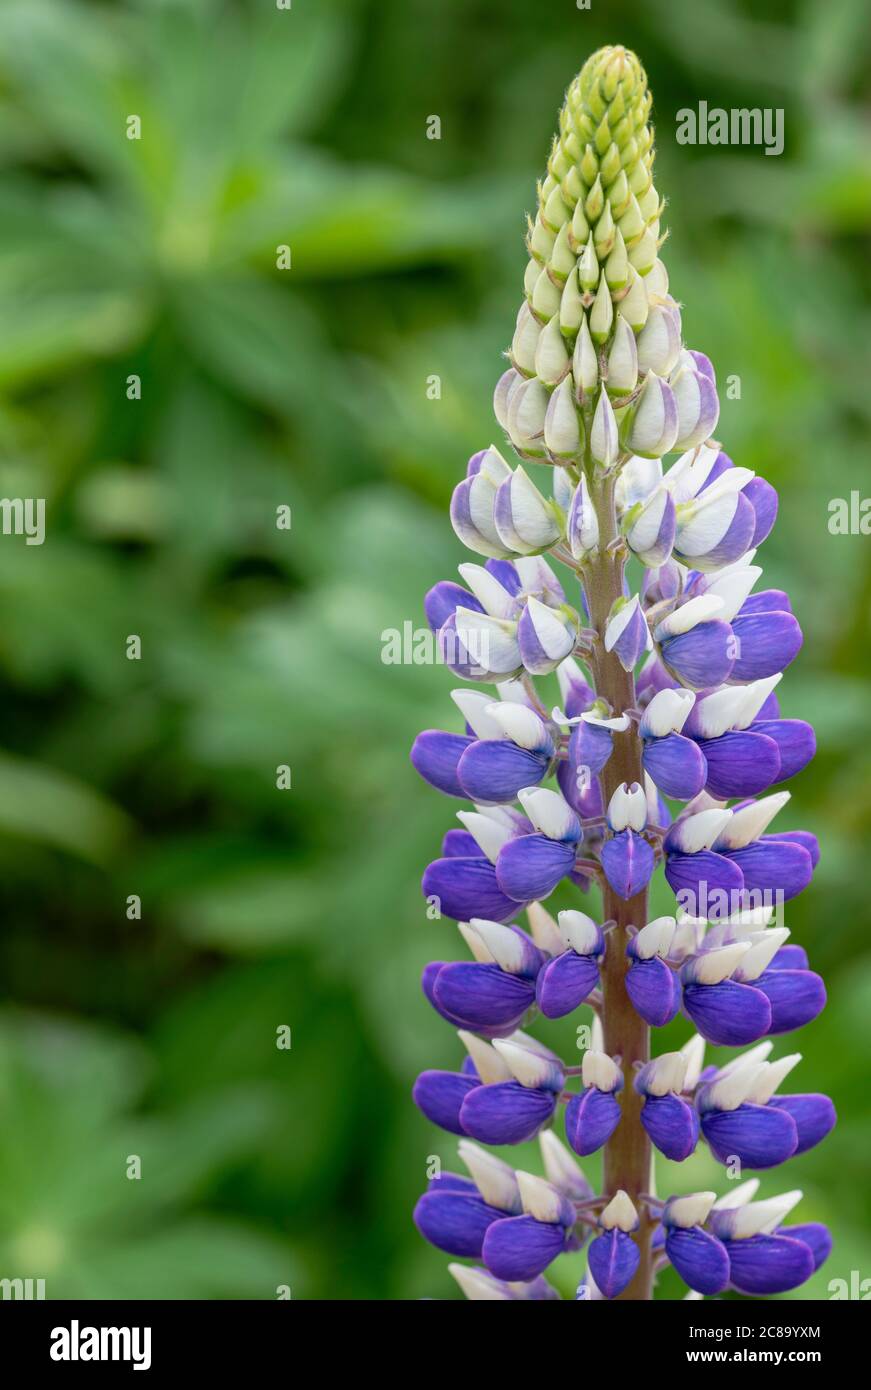 Lupin, Lupinus 'Persian Slipper', Clos3e-up detail of Mauve and white flowers growing outdoor. Stock Photo